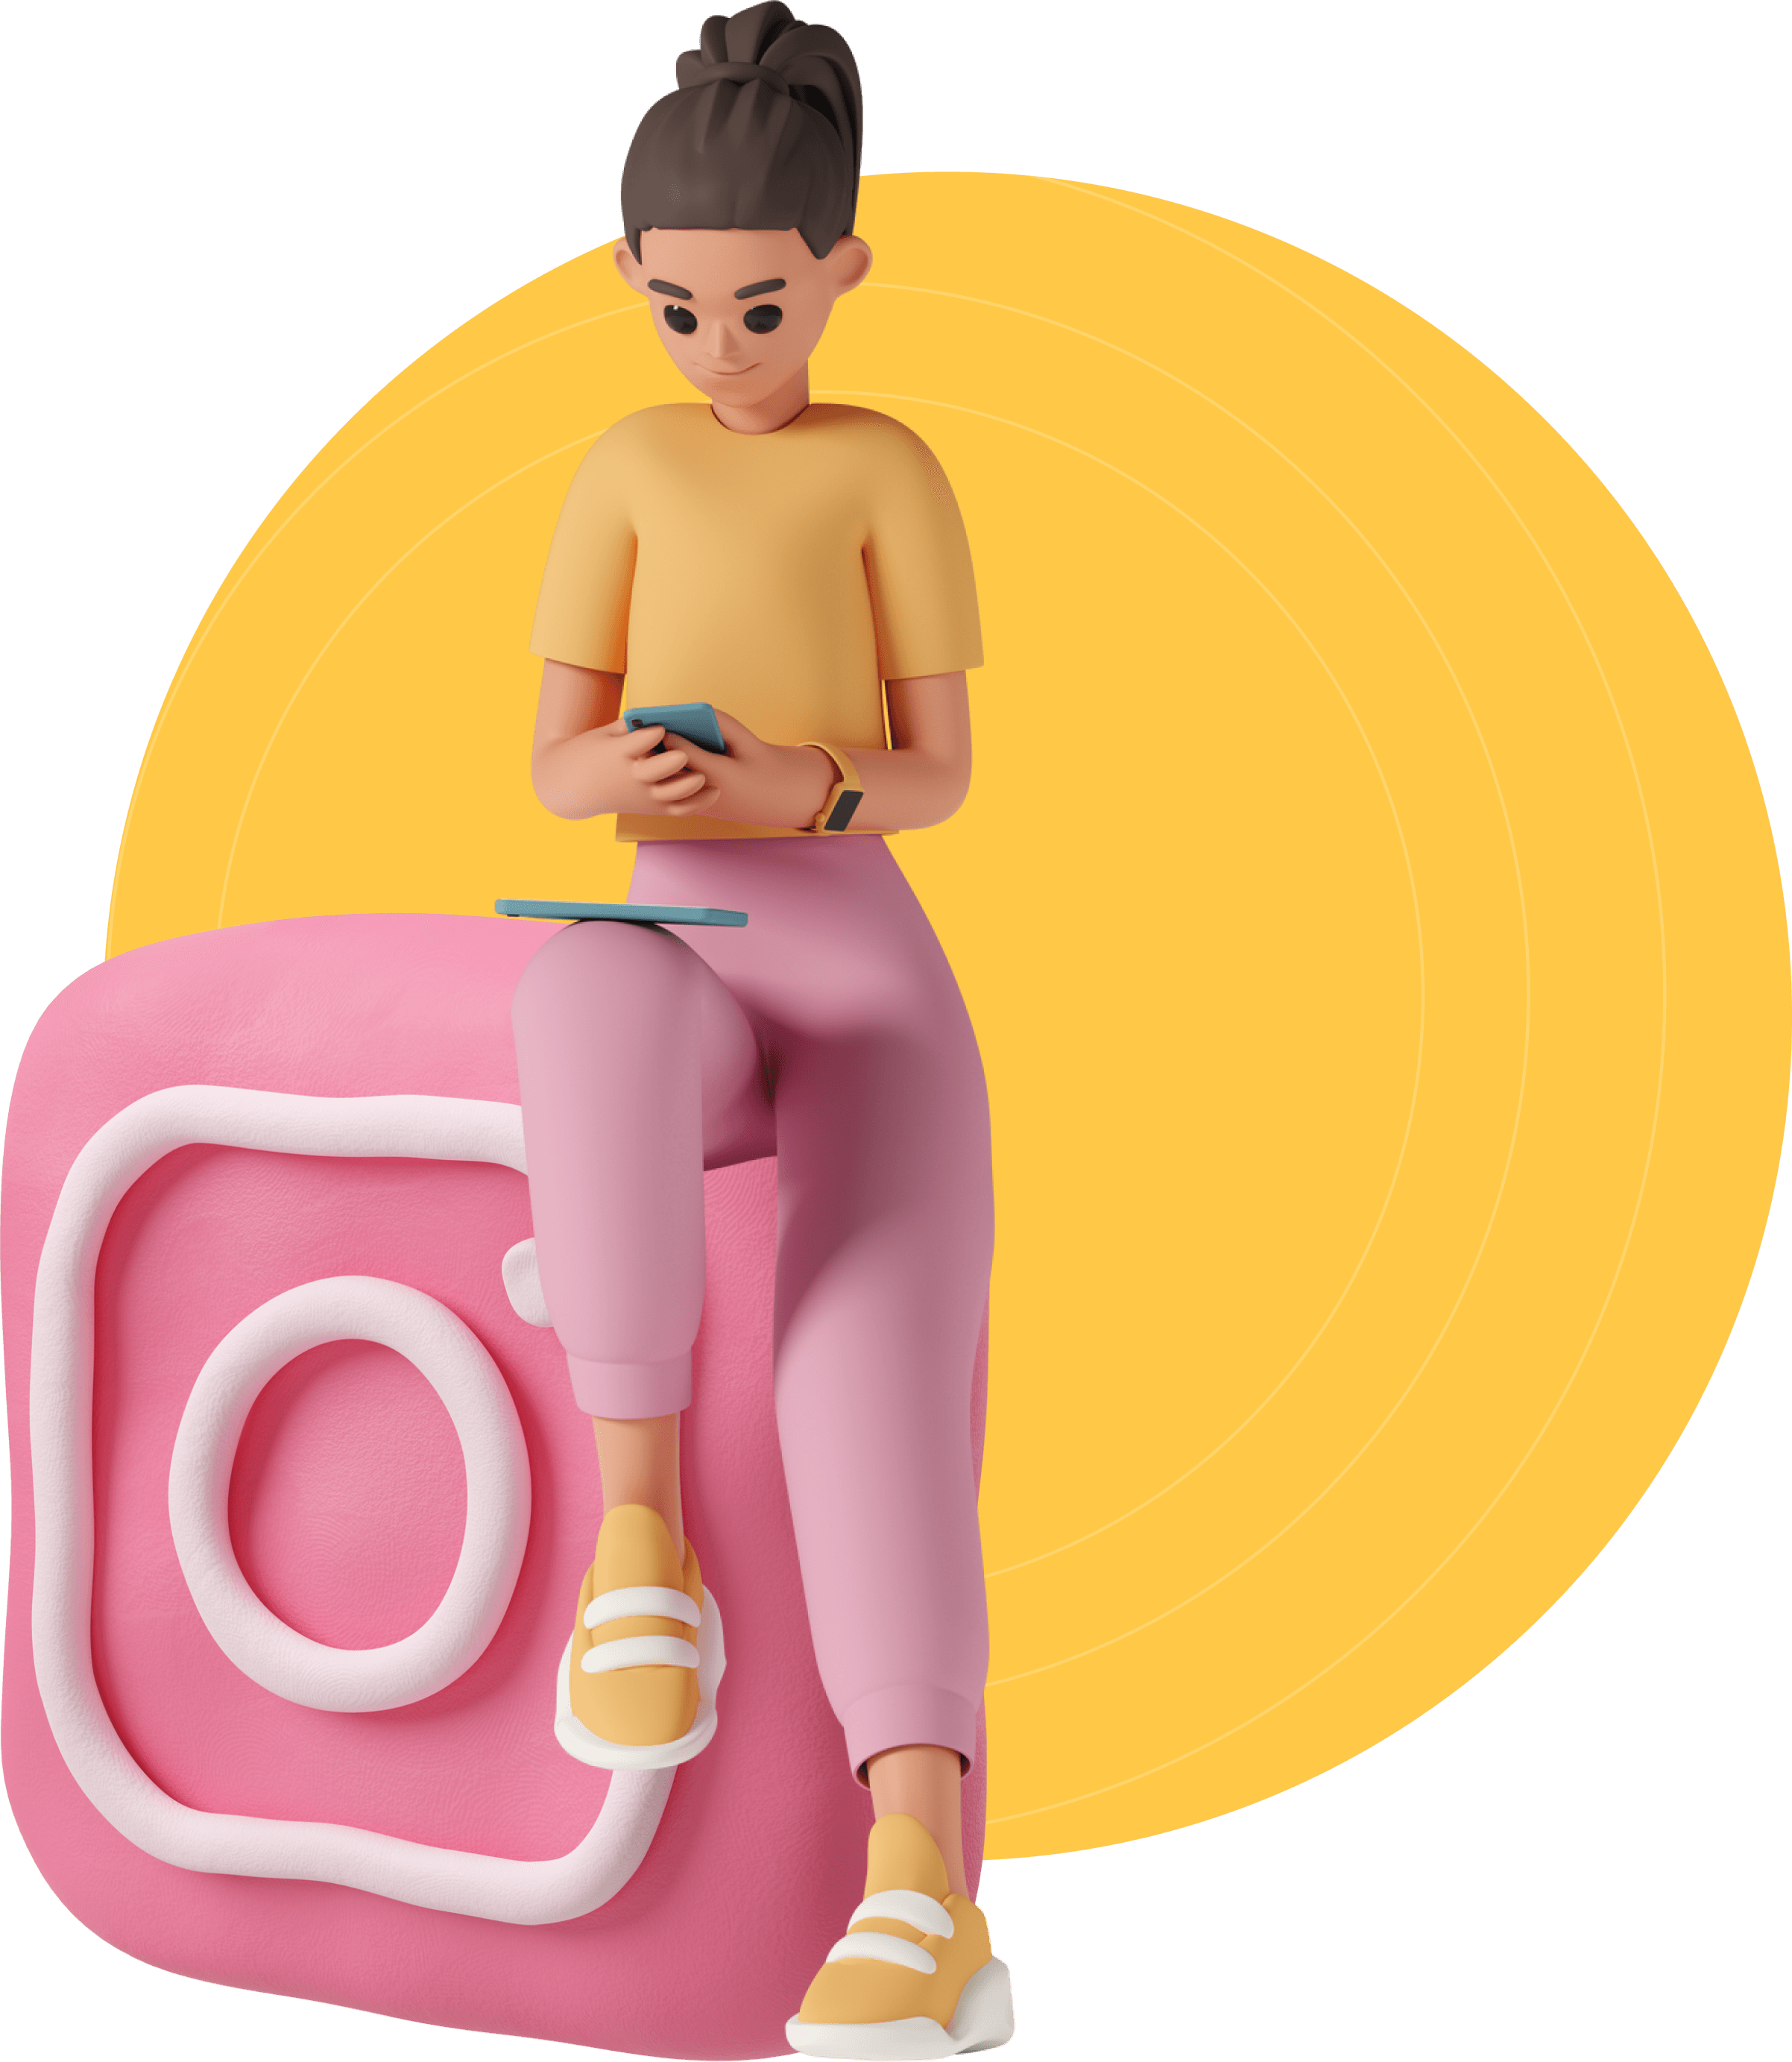 A woman sitting on the instagram logo and using her phone